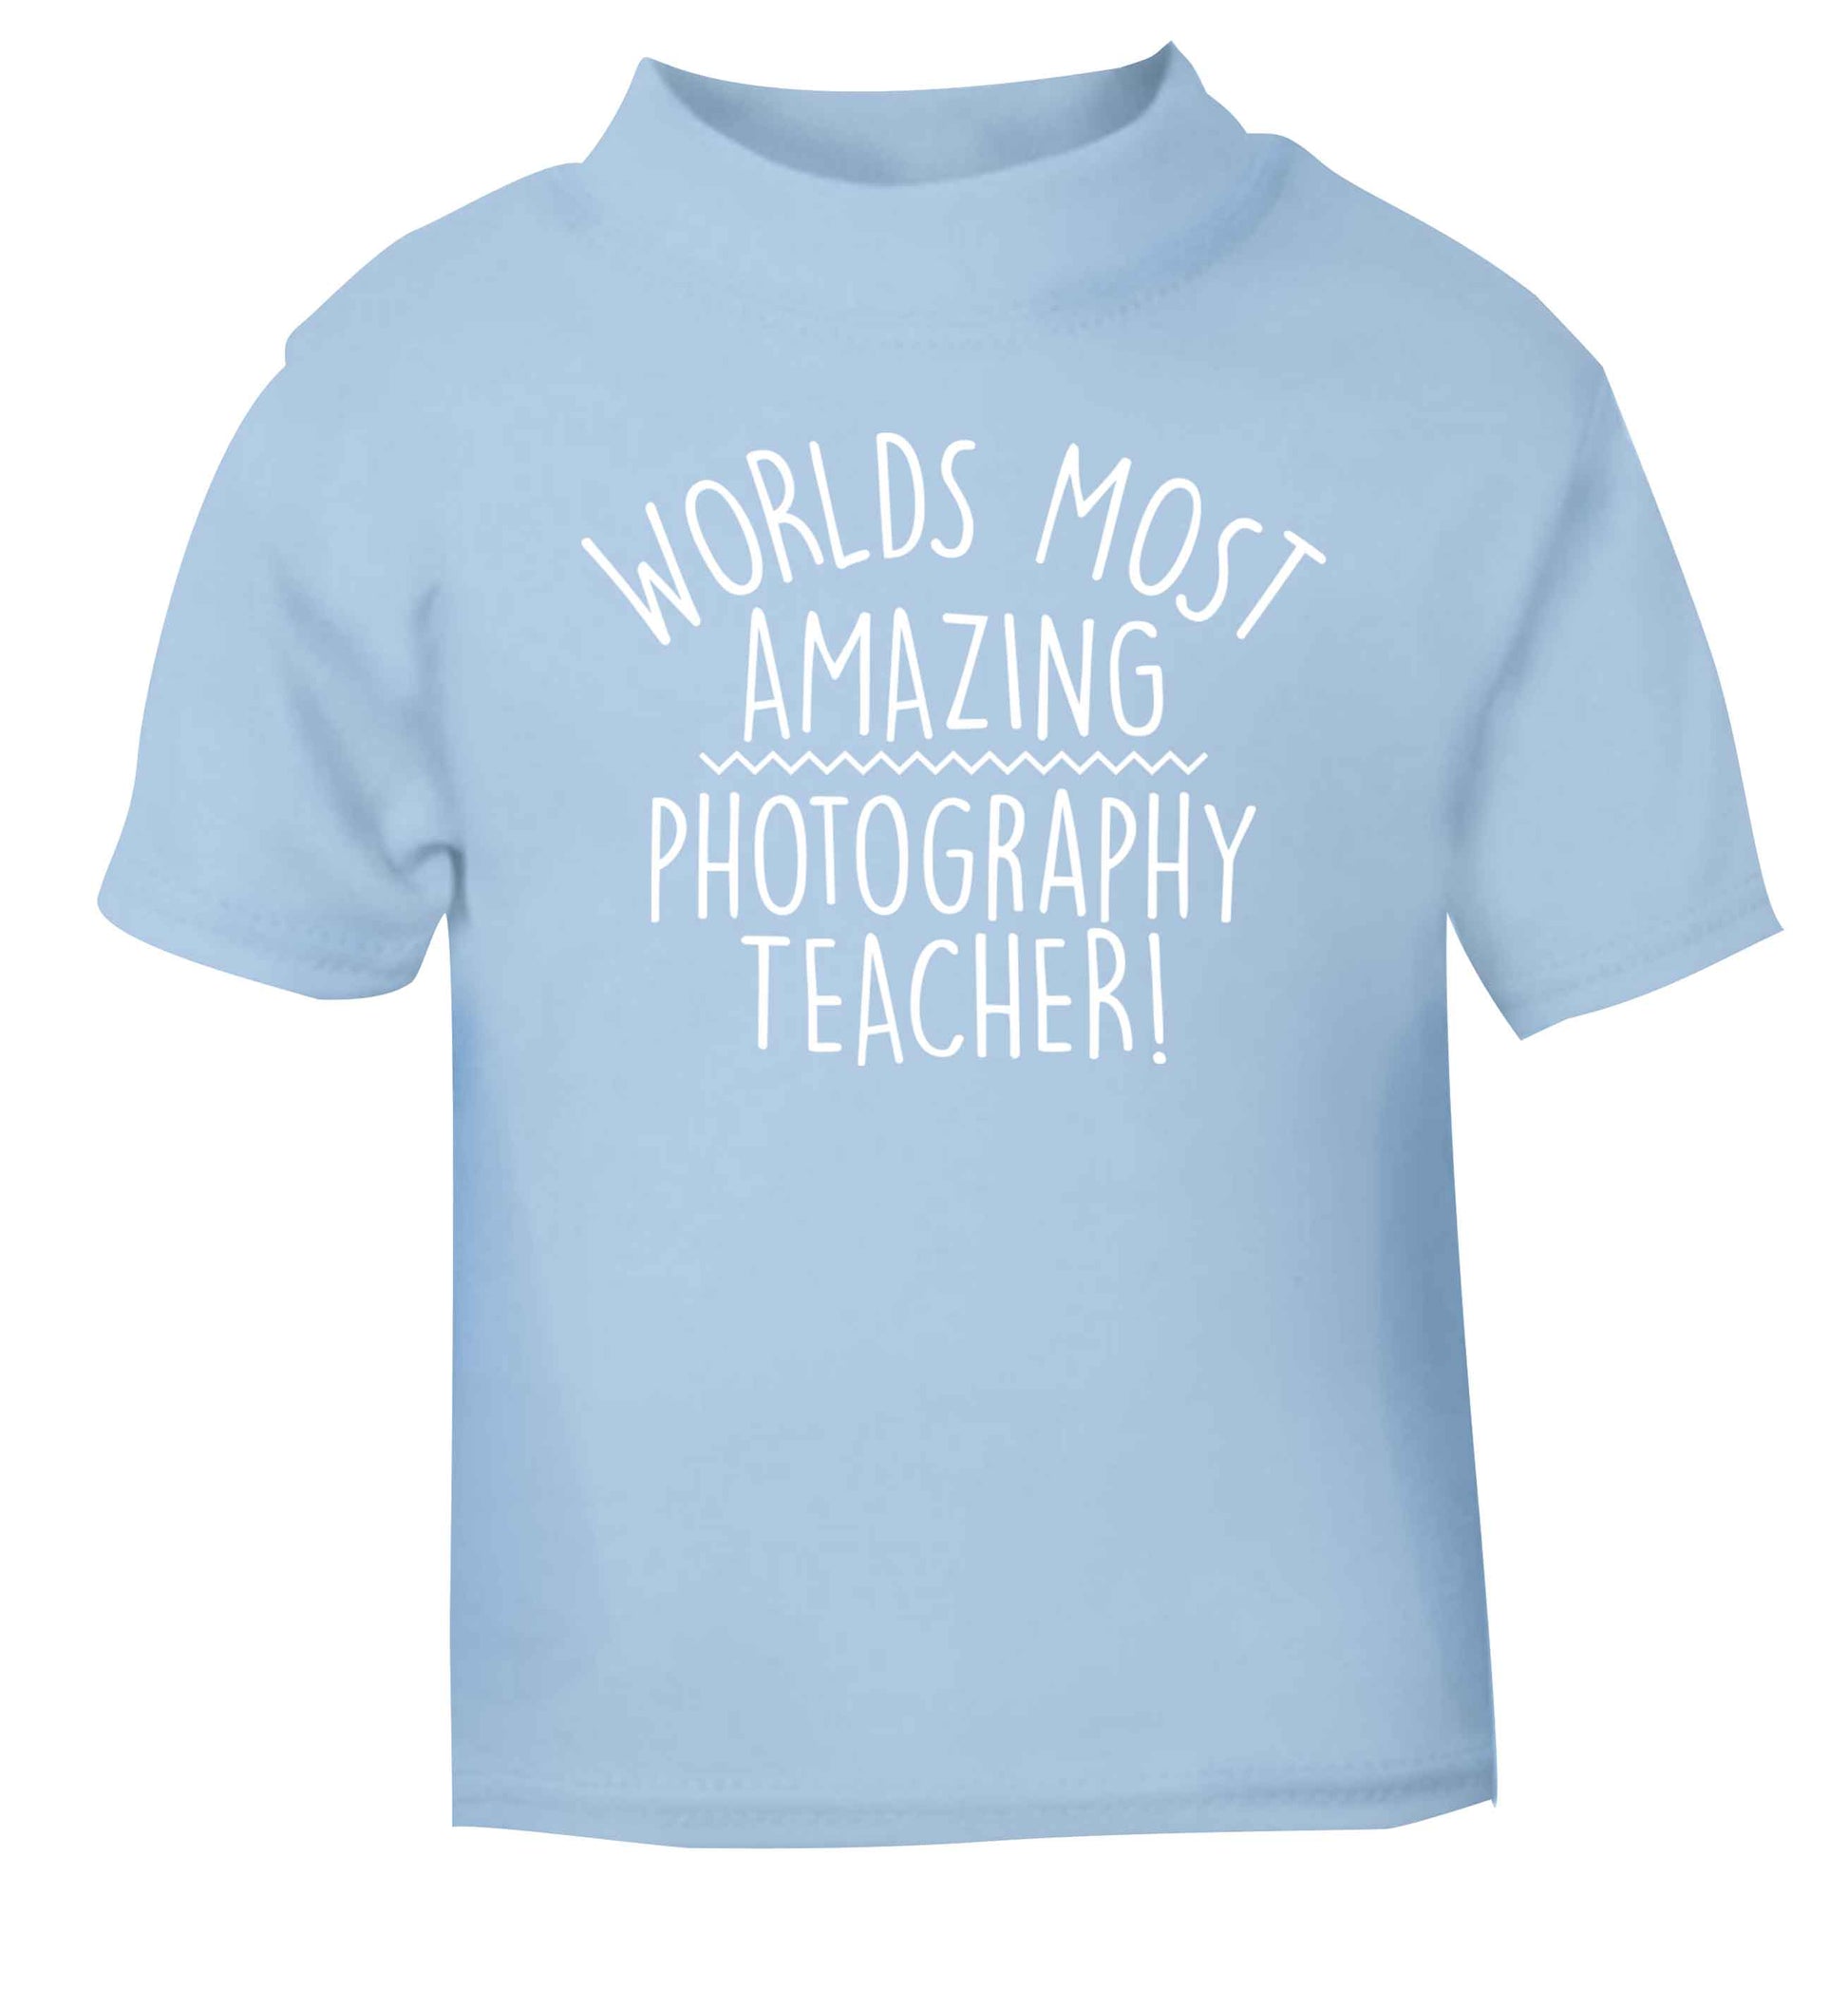 Worlds most amazing photography teacher light blue baby toddler Tshirt 2 Years